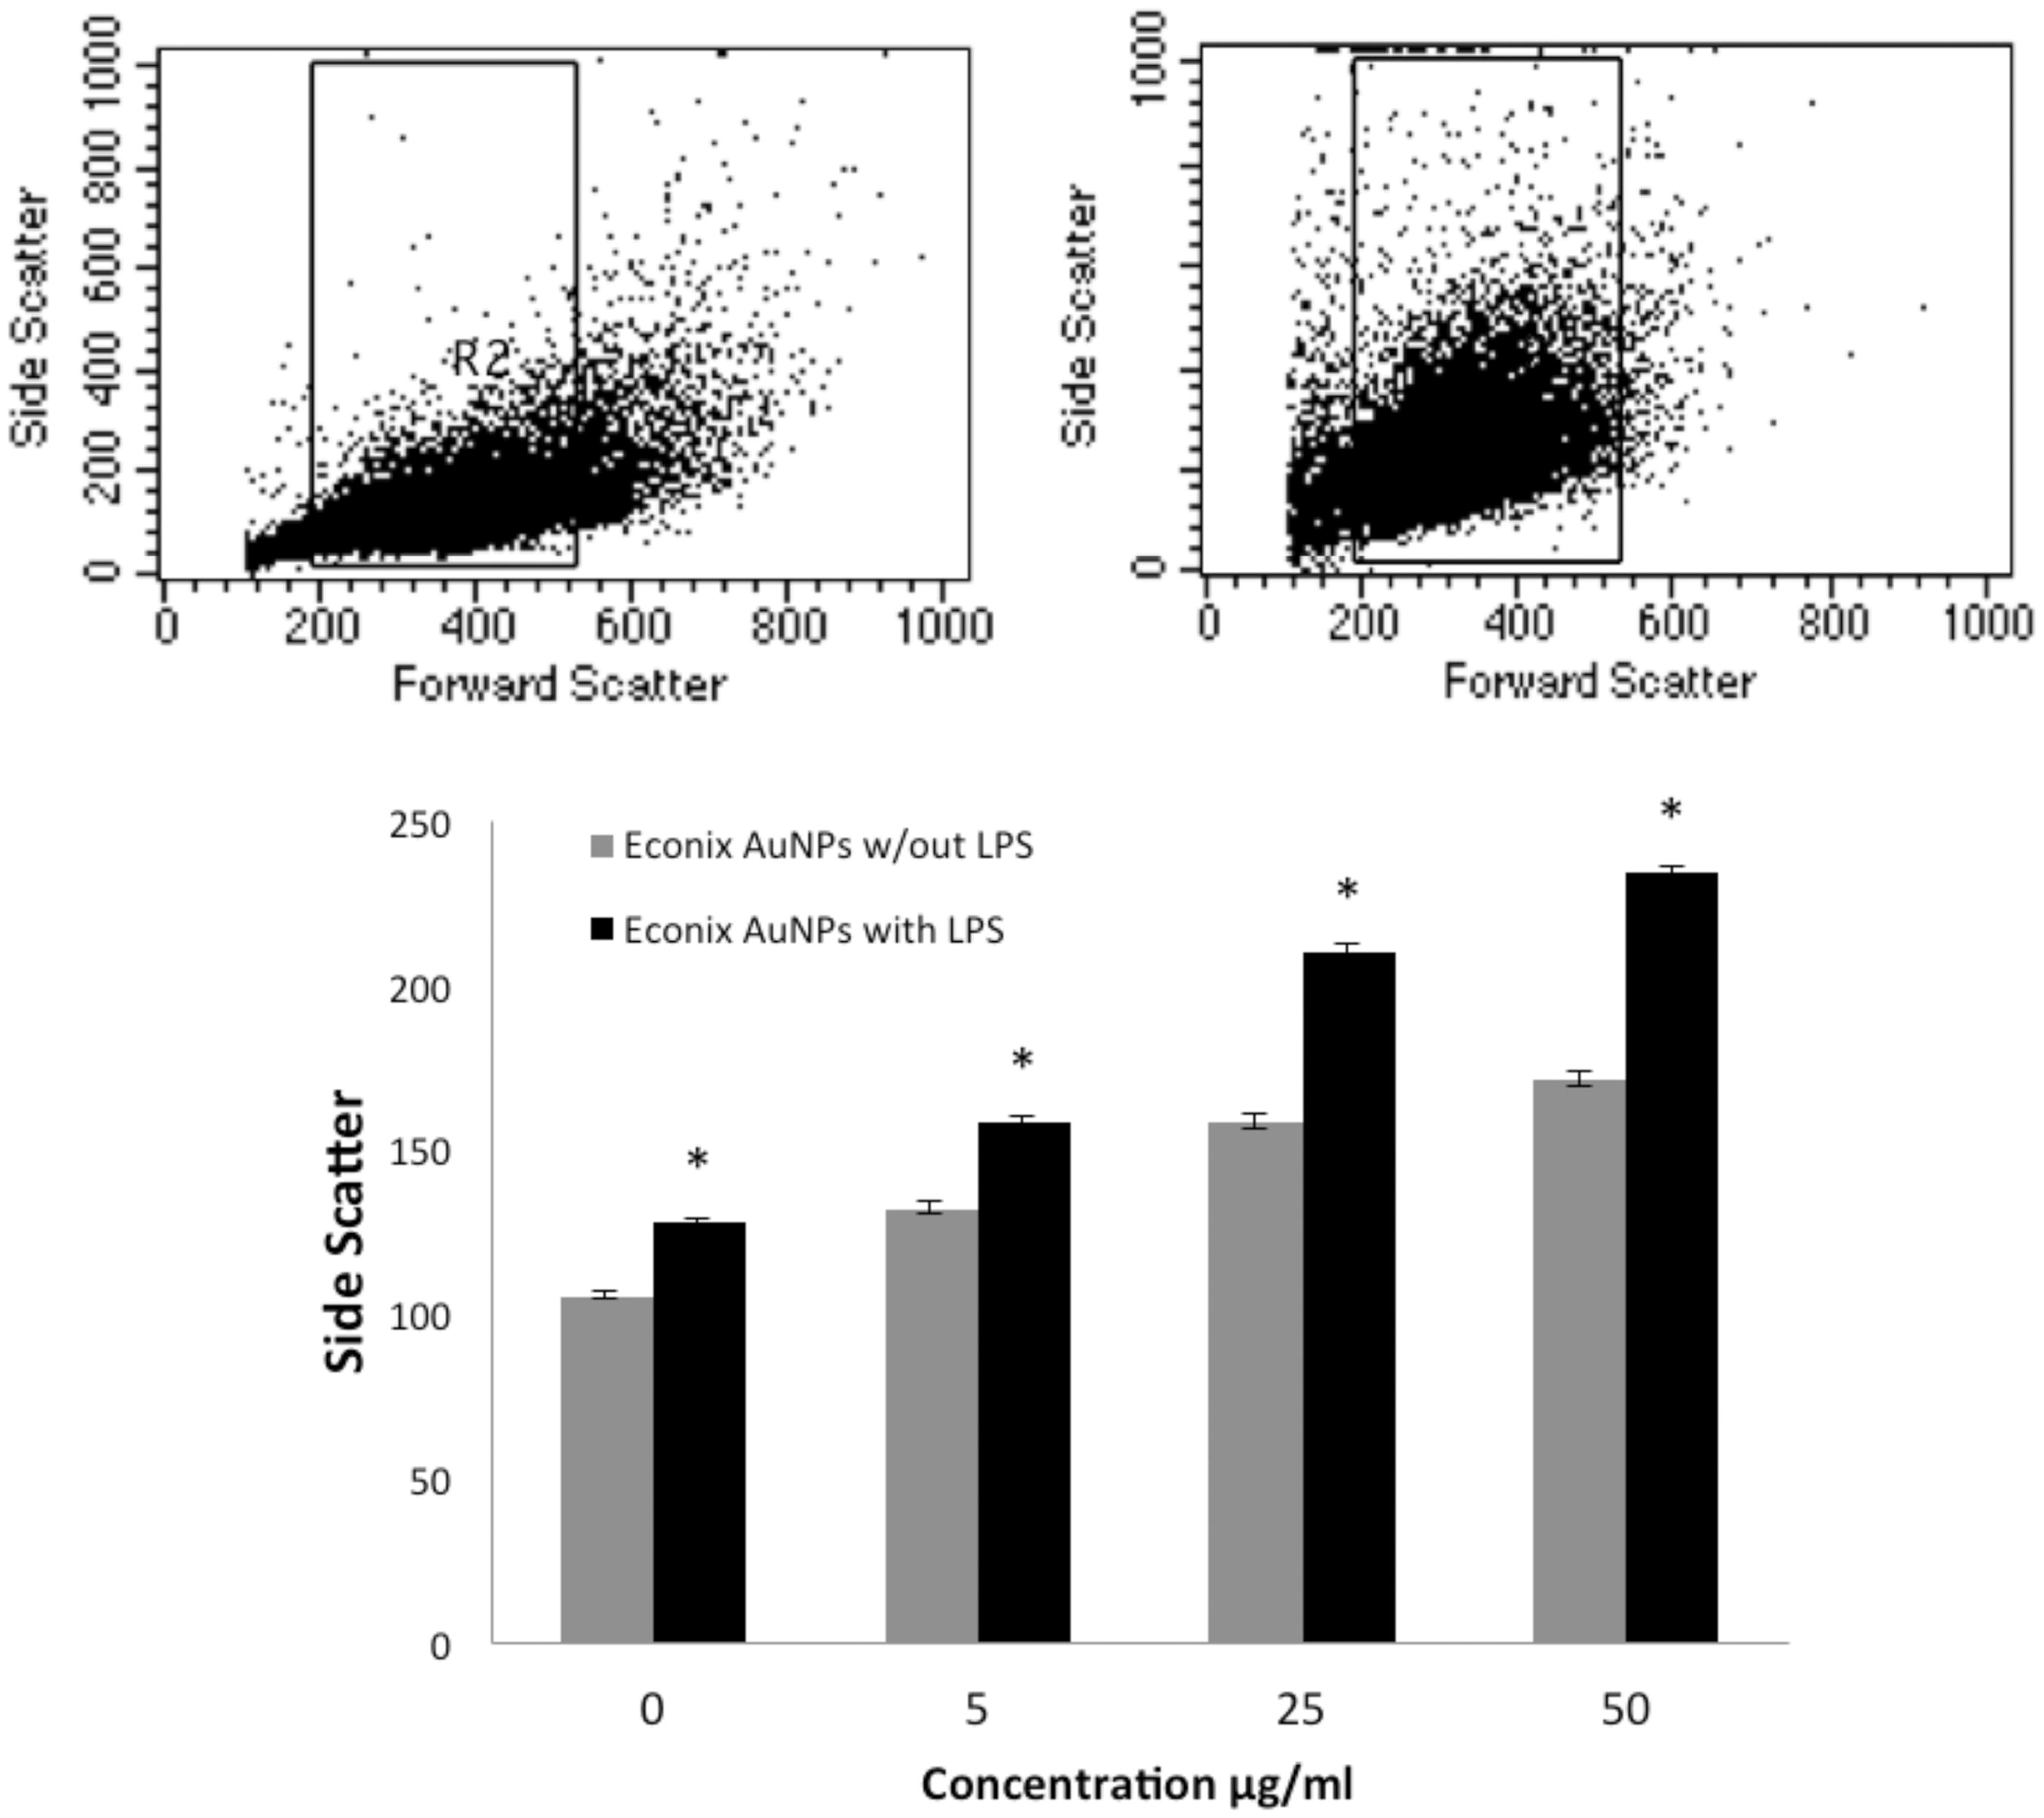 Figure 2. Particle uptake was measured by flow cytometric detection of side scatter. The upper panel shows representative dot plots of untreated RAW macrophages (left) and with 100 ng/ml Econix AuNP (right). Graph shows concentration curves for Econix AuNP with and without LPS, both of which are statistically significant (ANOVA, p < 0.05). *p < 0.05 comparing with LPS to without LPS at each concentration (Bonferroni post-hoc analysis).